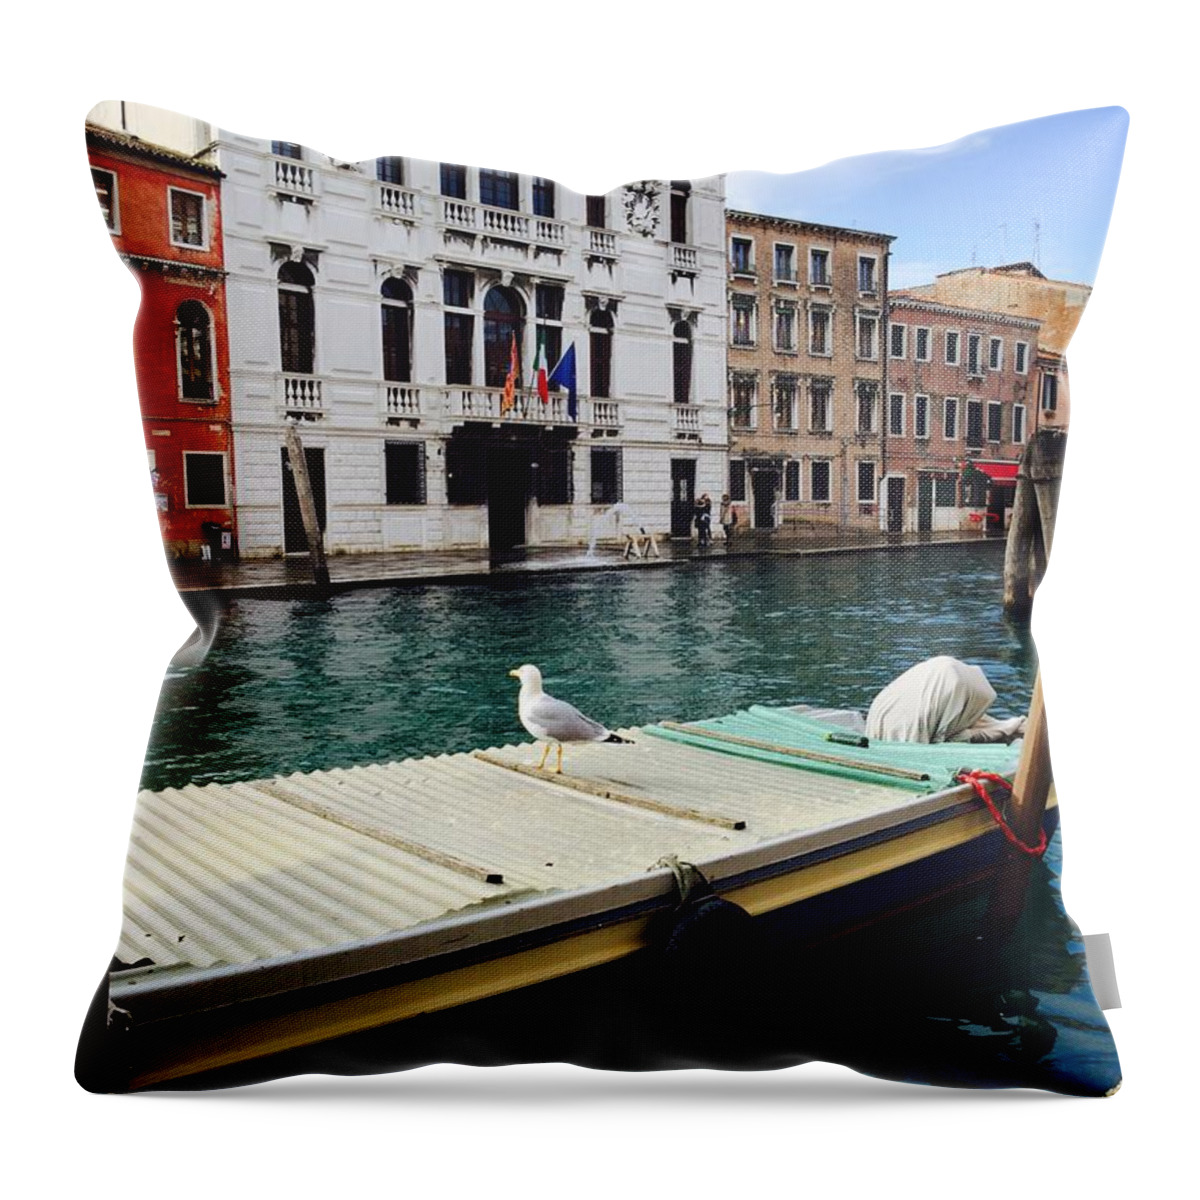  Throw Pillow featuring the photograph Venice boats by Brett Williams